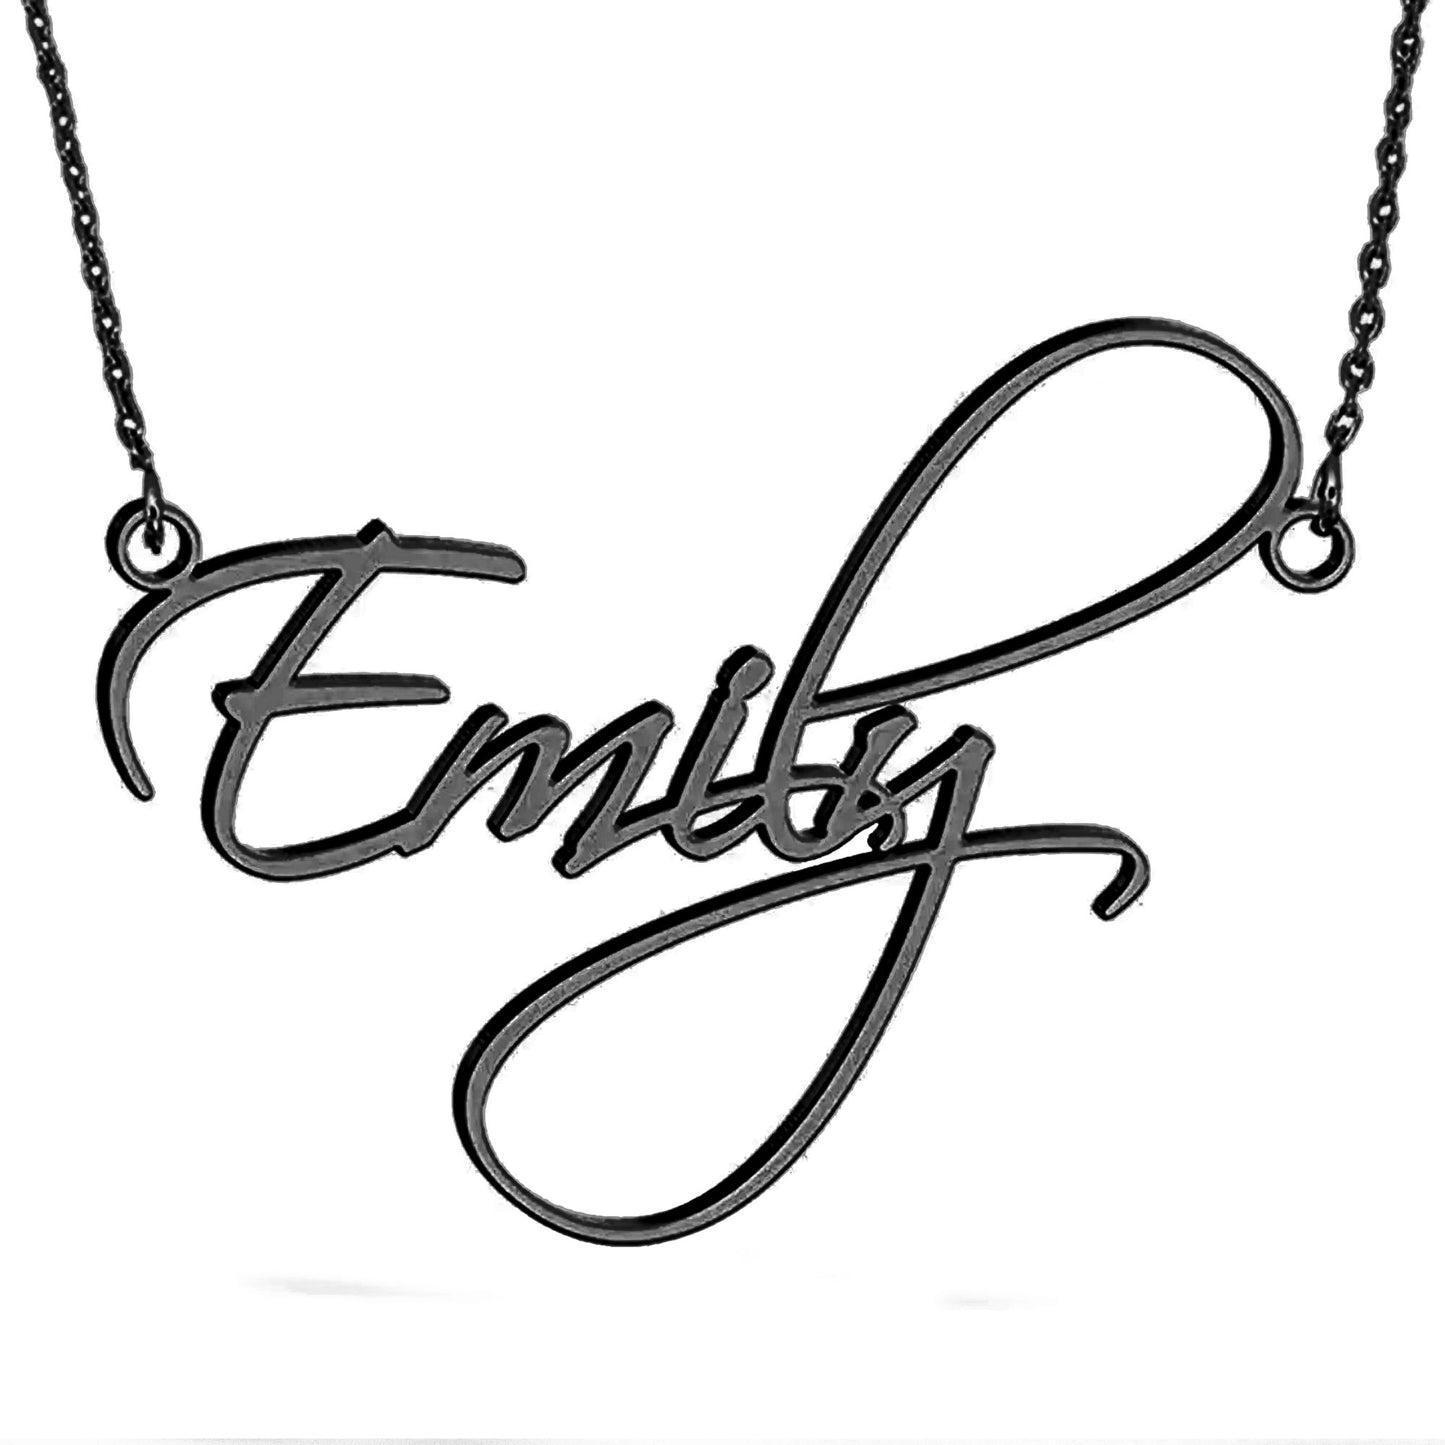 Detailed view of black link chain with a custom-made script name necklace from CustomNameJewelry.com.